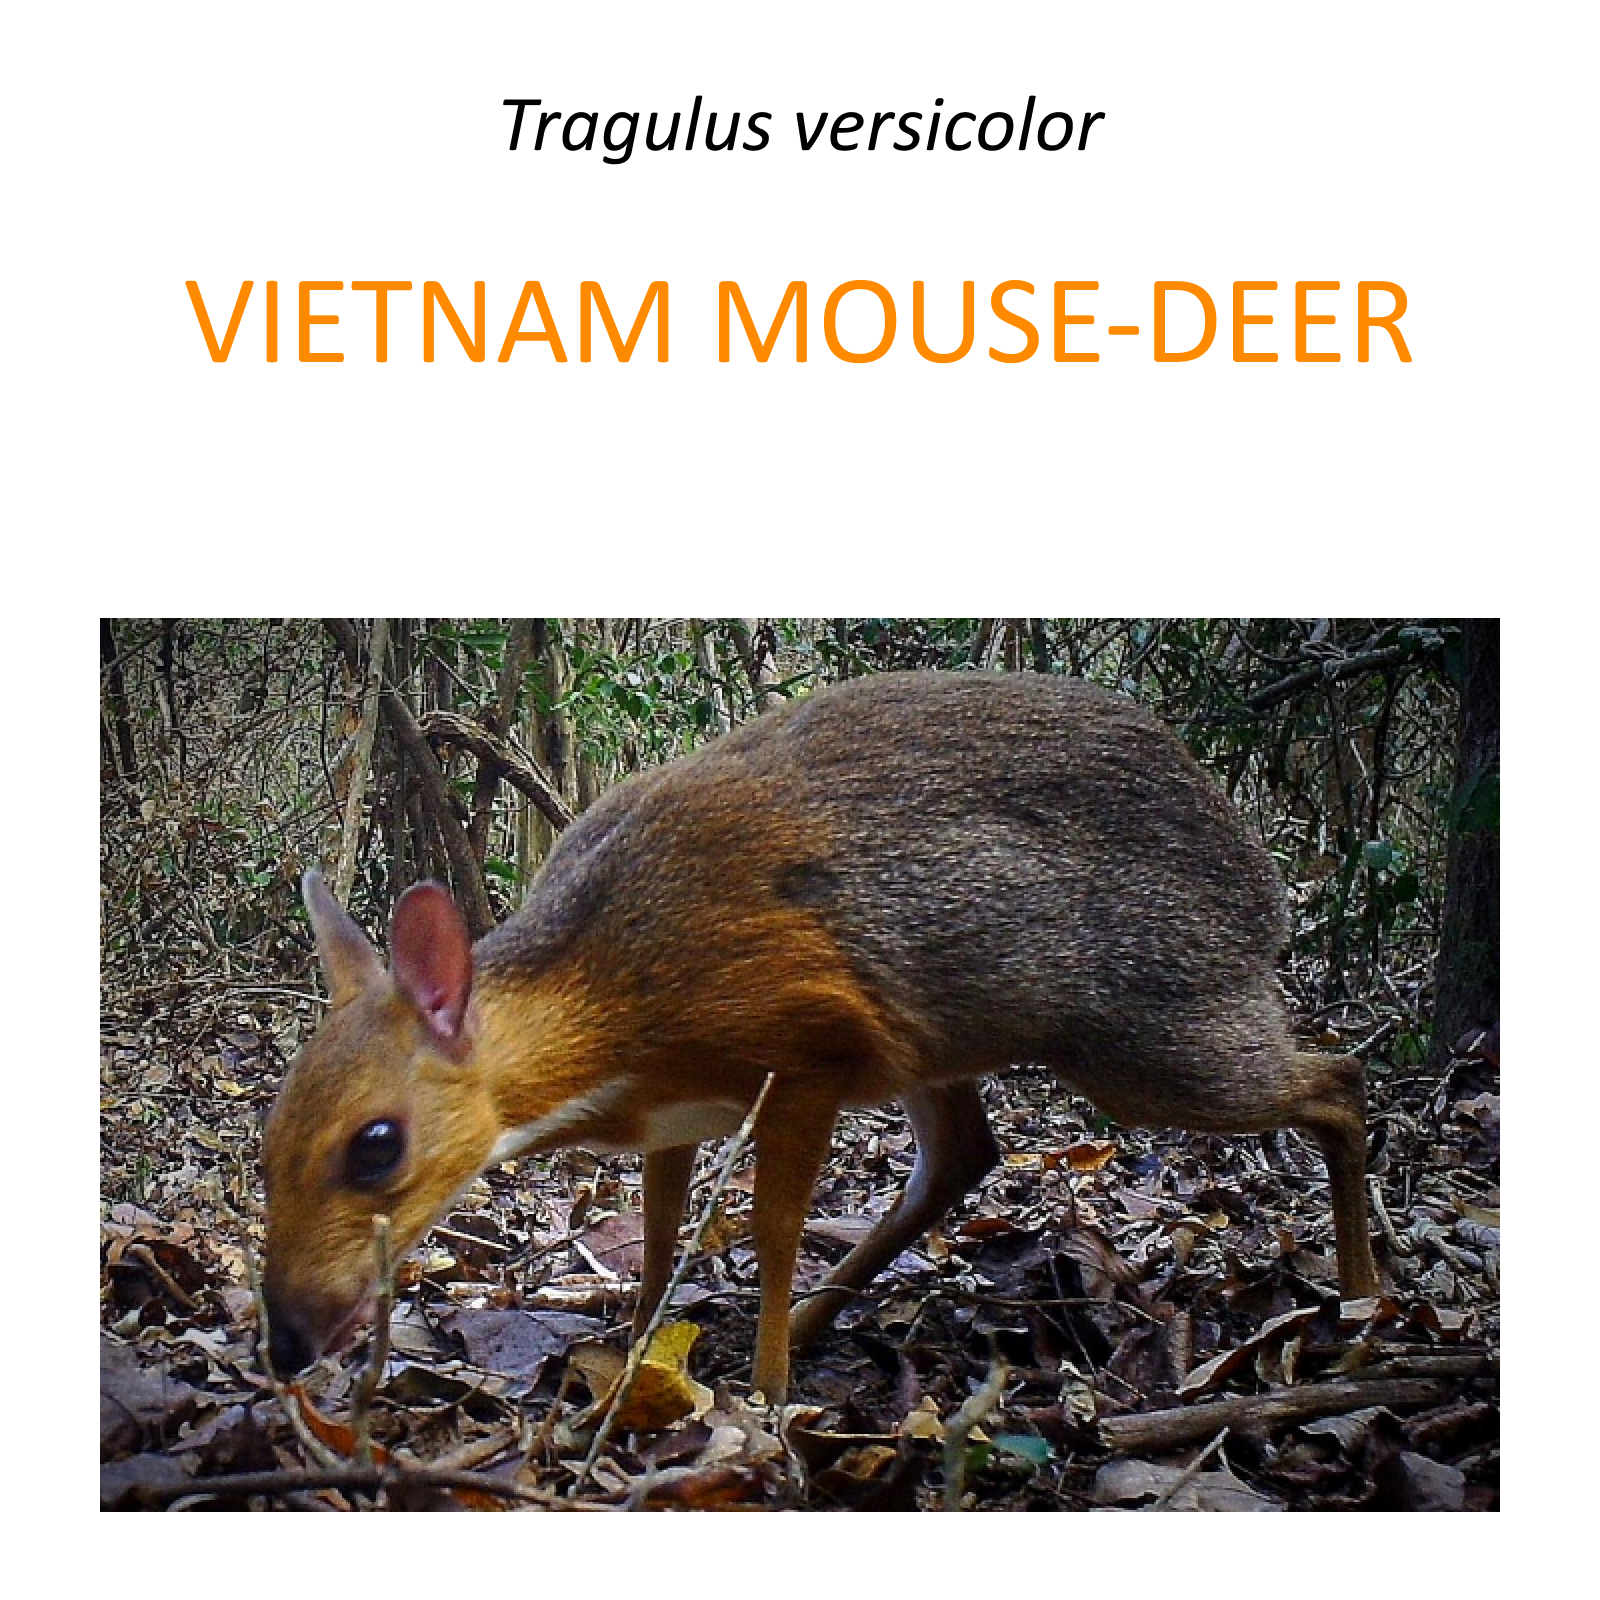 Silver-backed chevrotain protection project in Vietnam